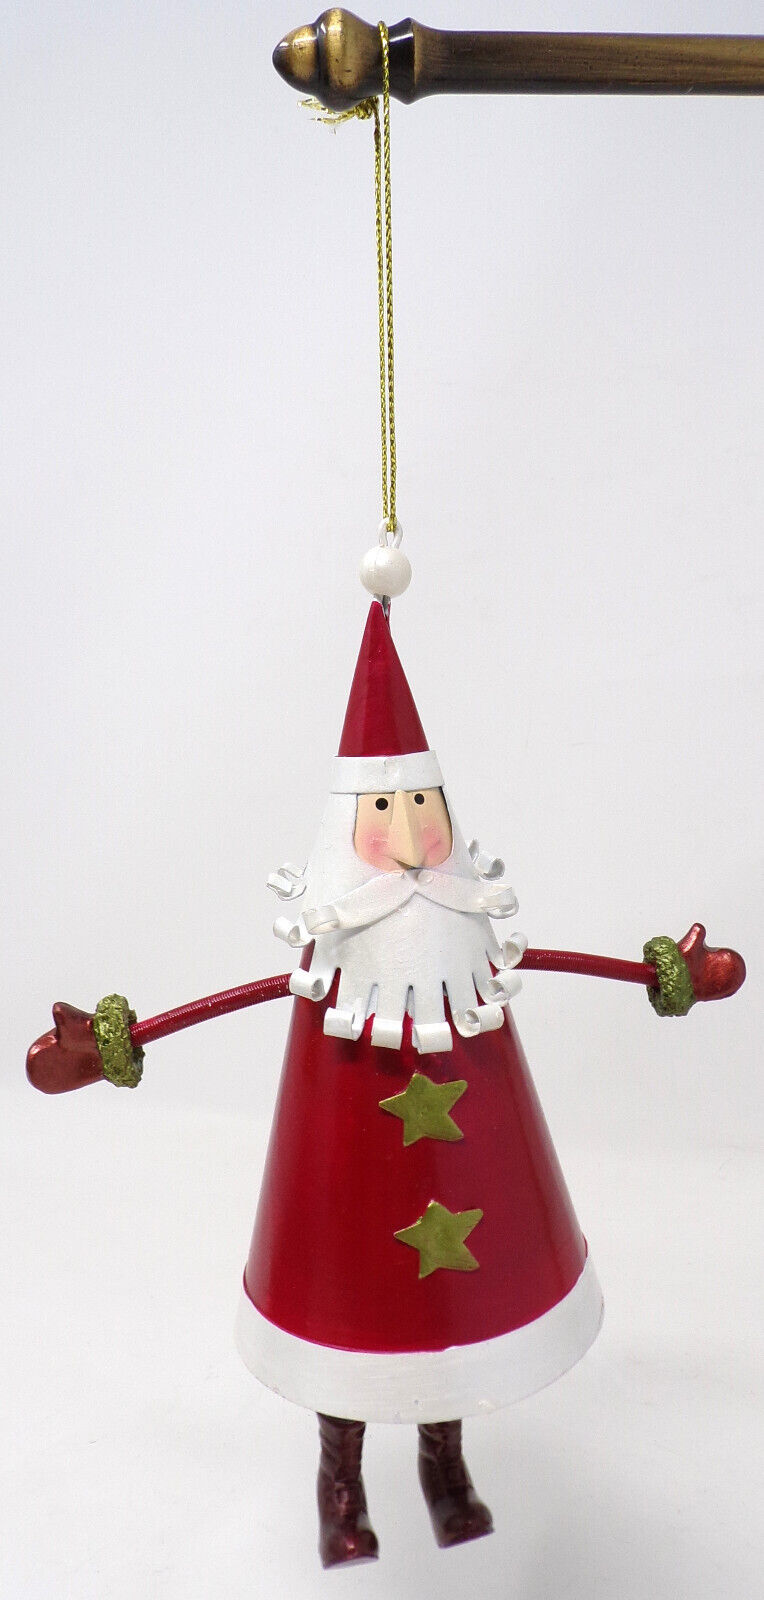 Tin Cone Shaped Santa Clause Christmas Ornament 6in.